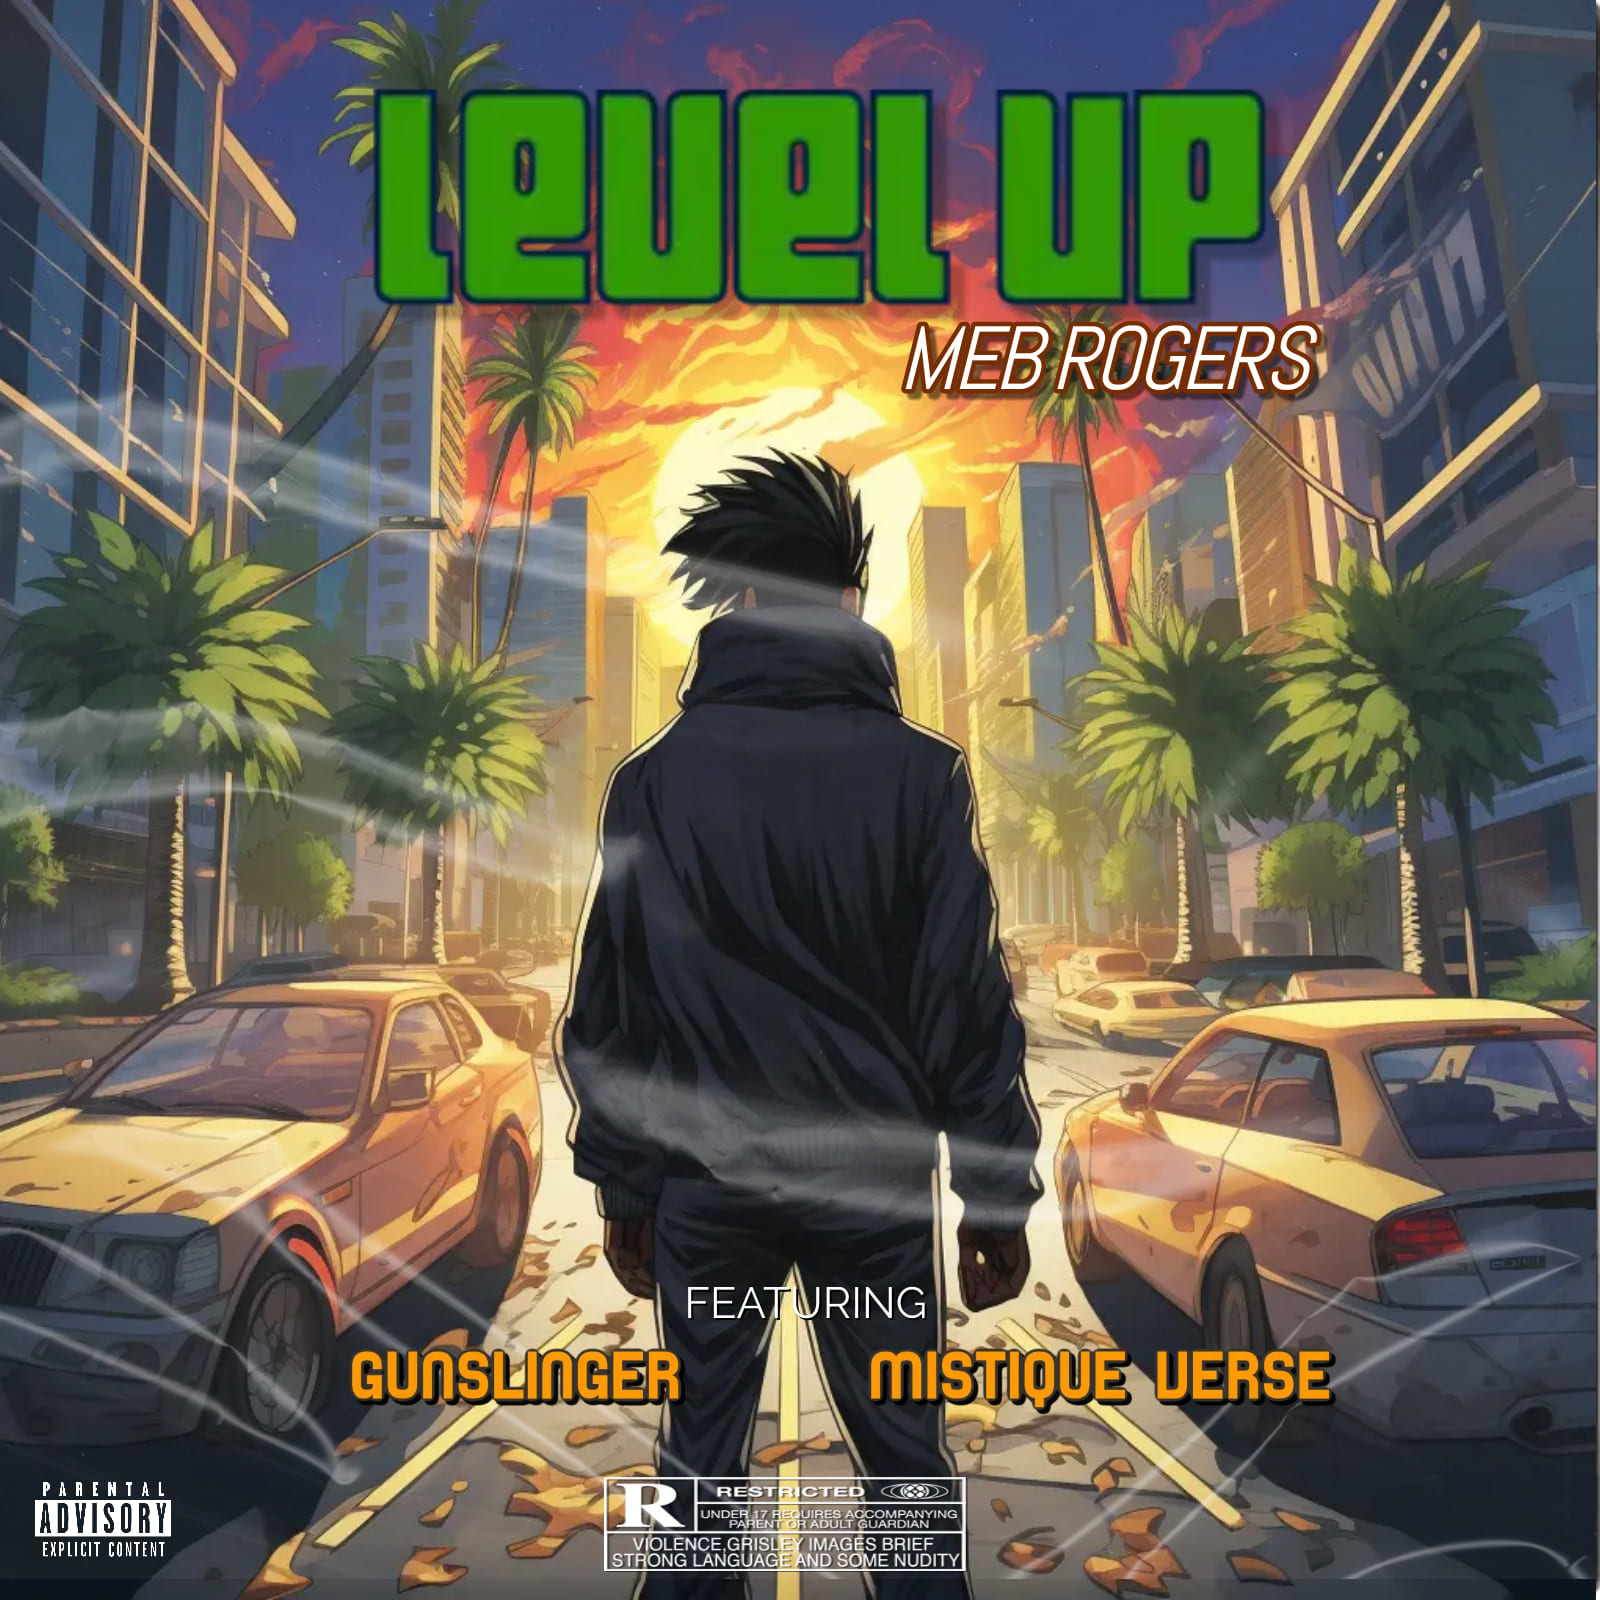 LEVEL UP cover 2 - Made with PosterMyWall (1).jpg